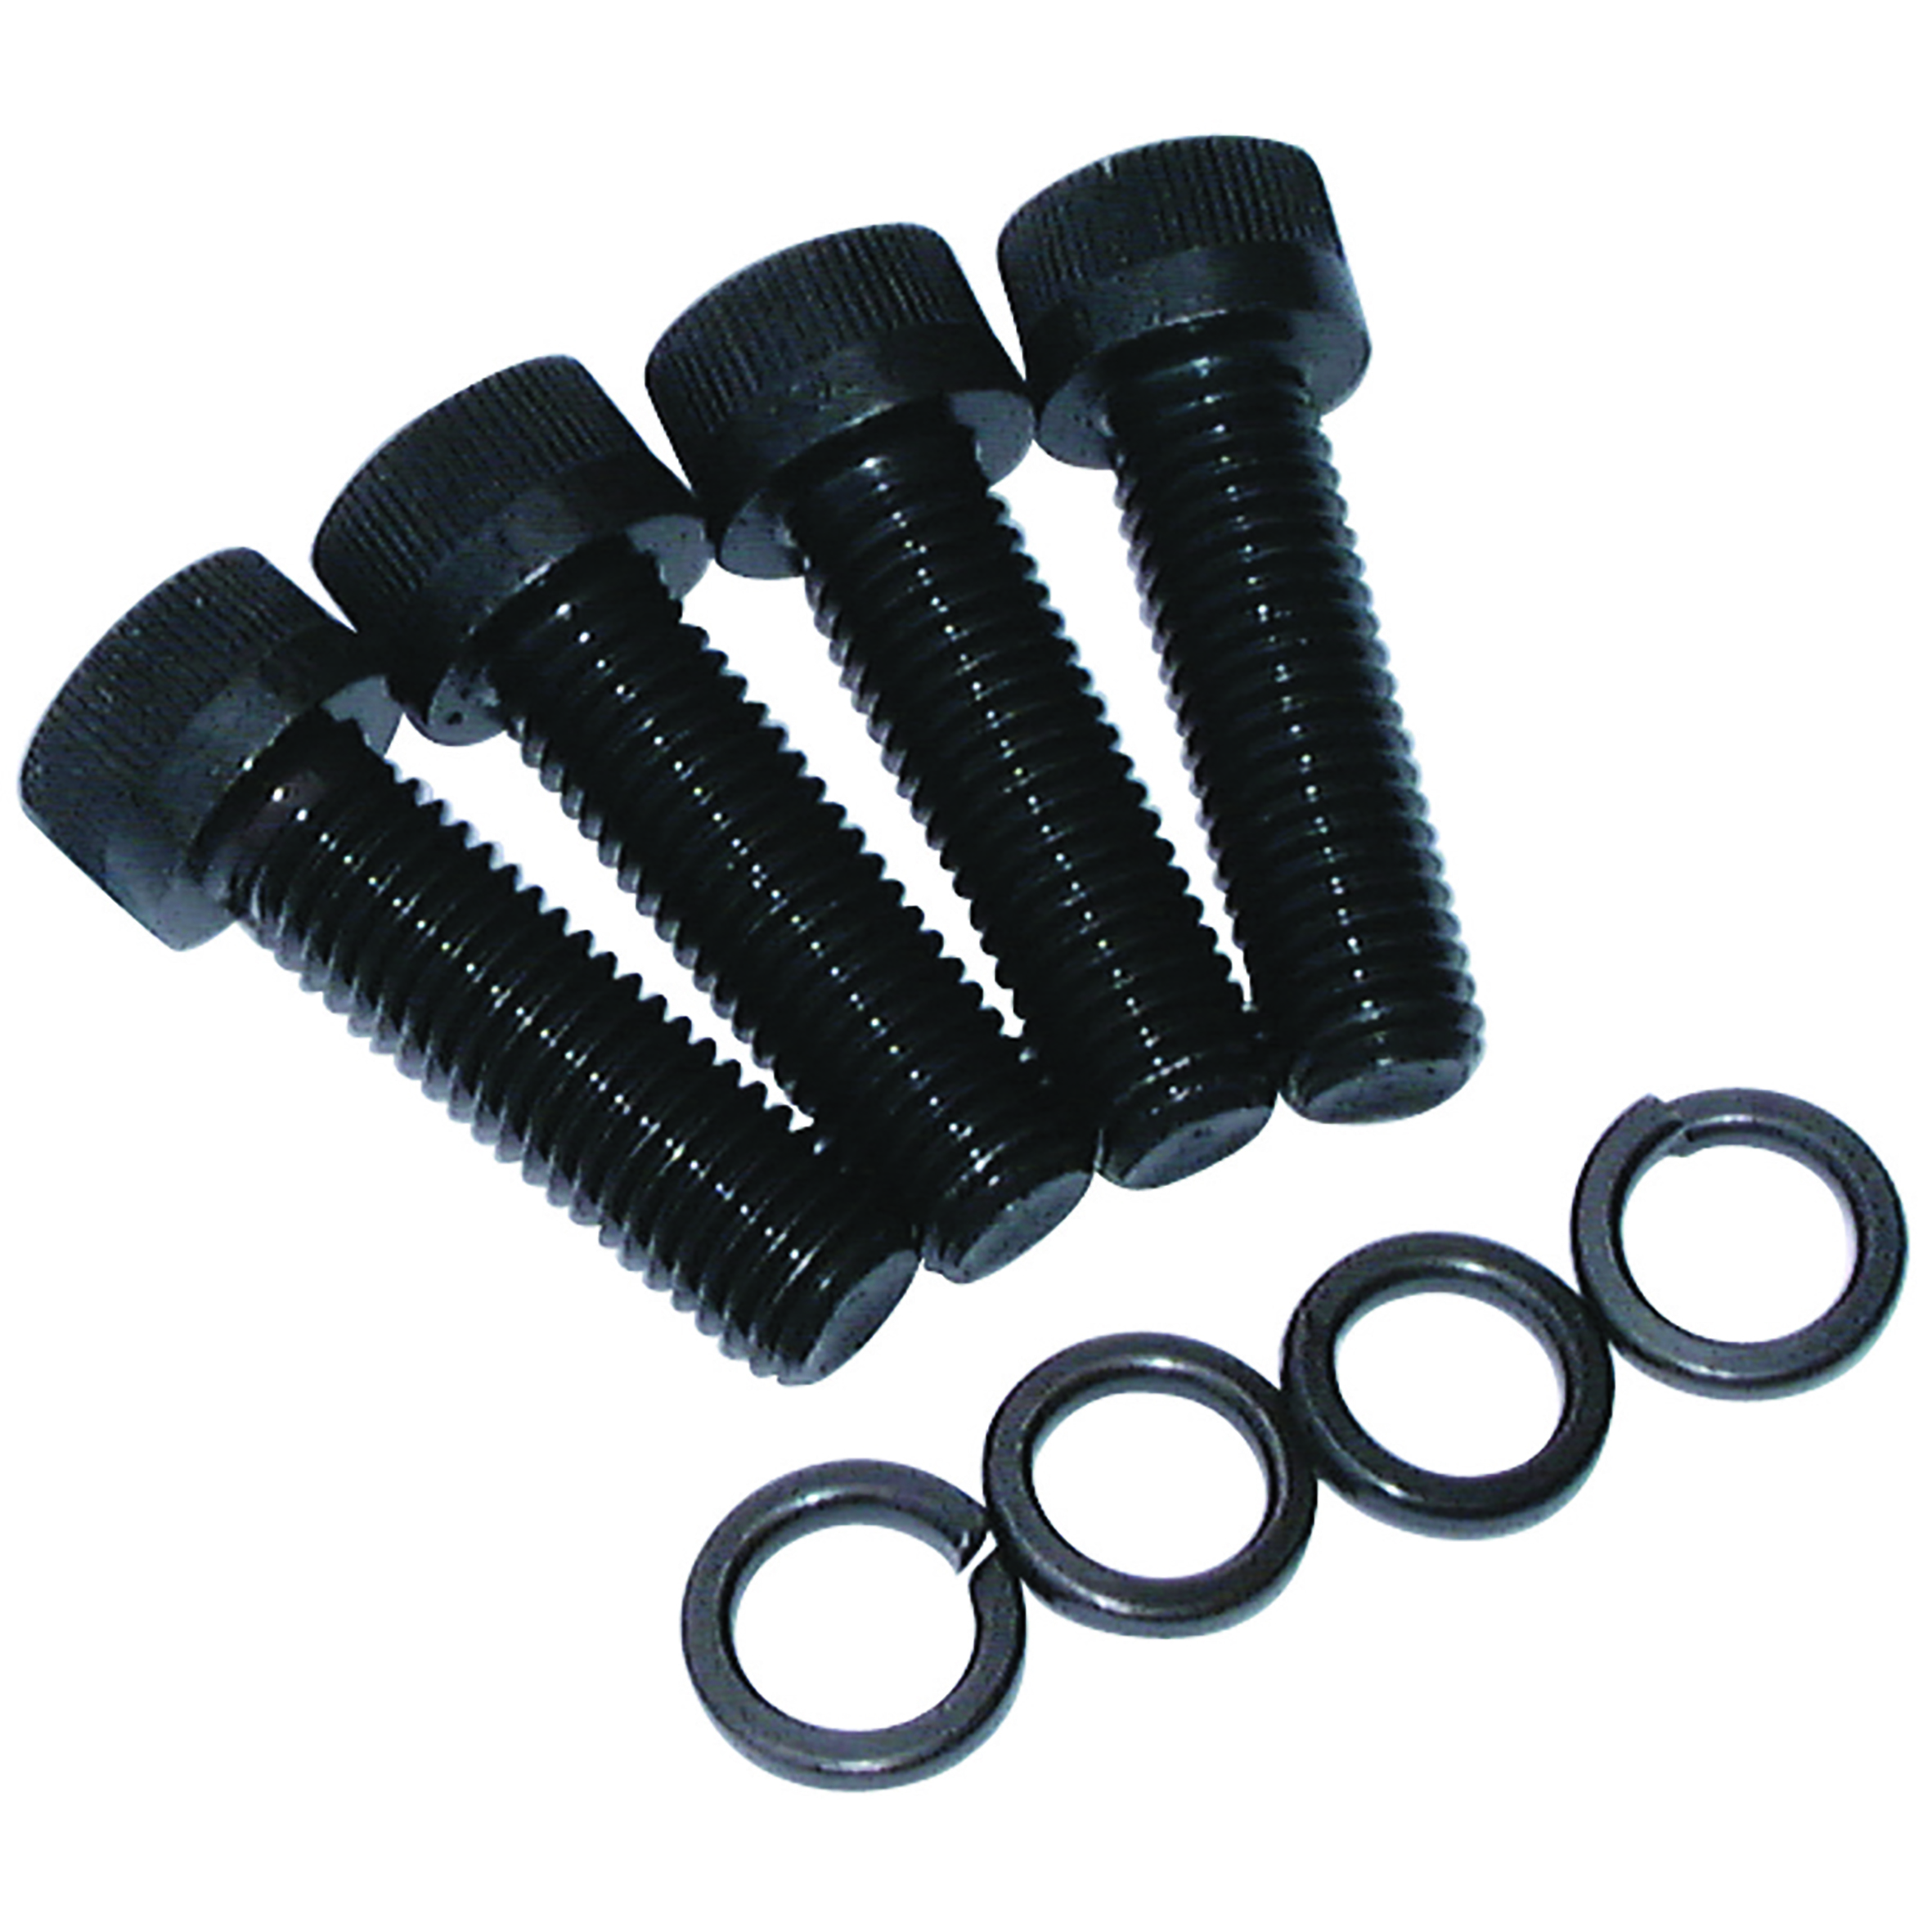 M8X25 BOLTS AND SPRING WASHERS X 4